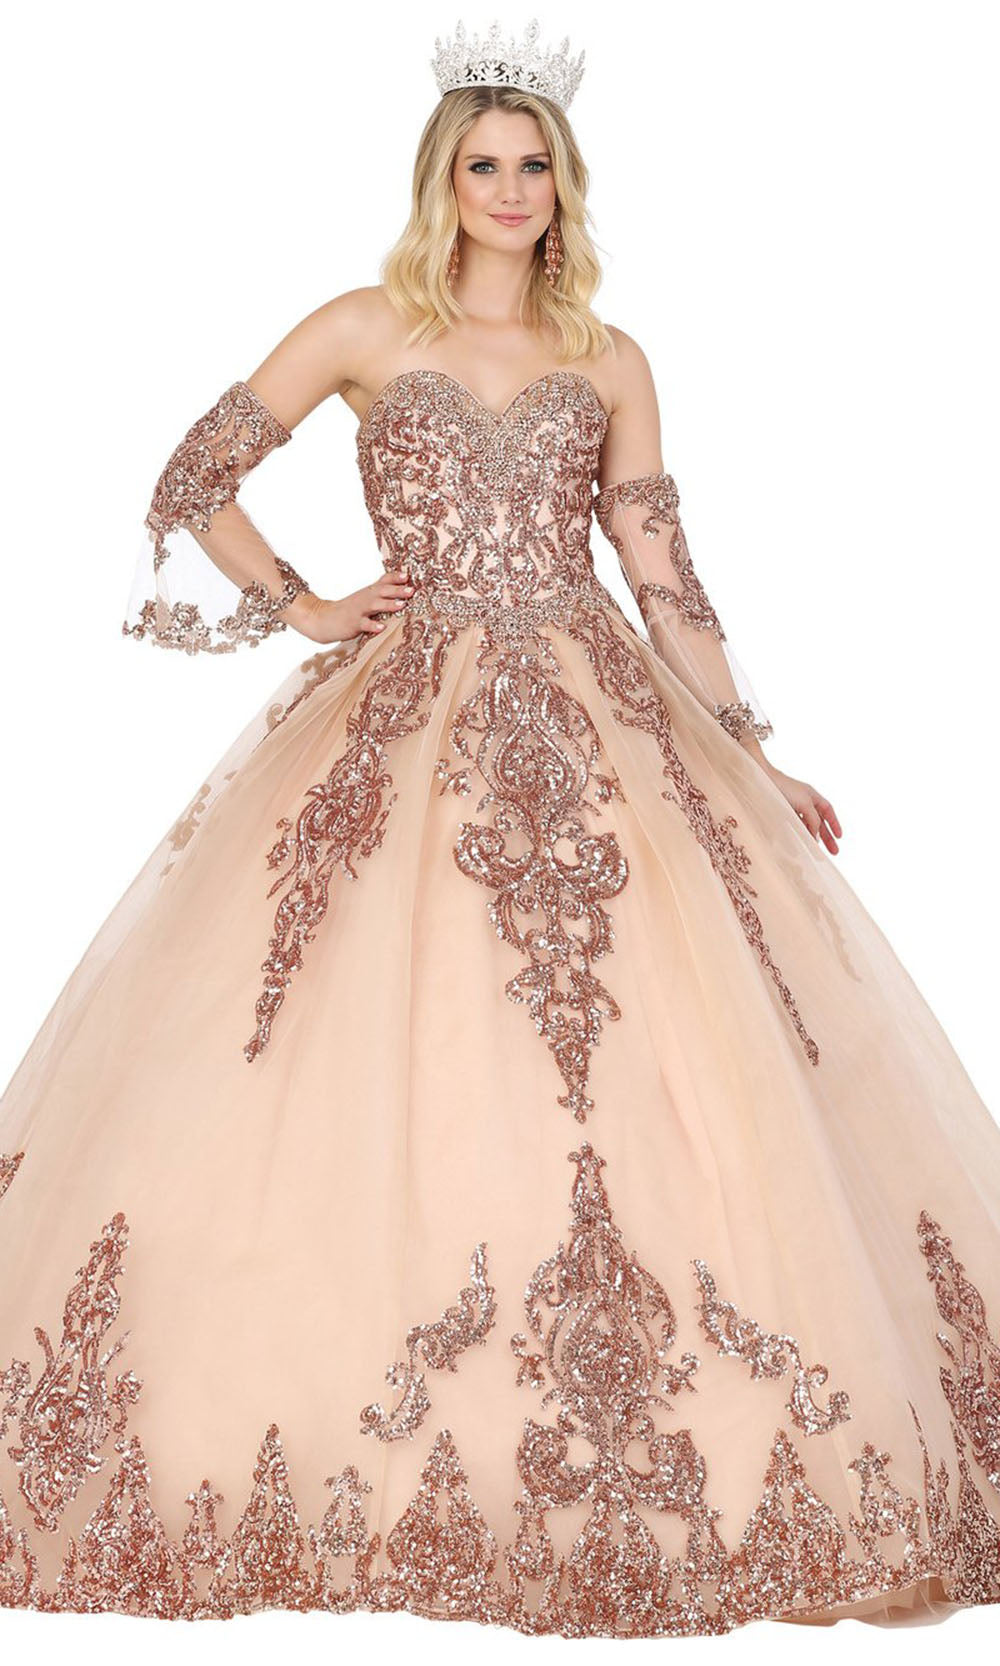 Dancing Queen - 1512 Embroidered Sweetheart Ballgown In Pink